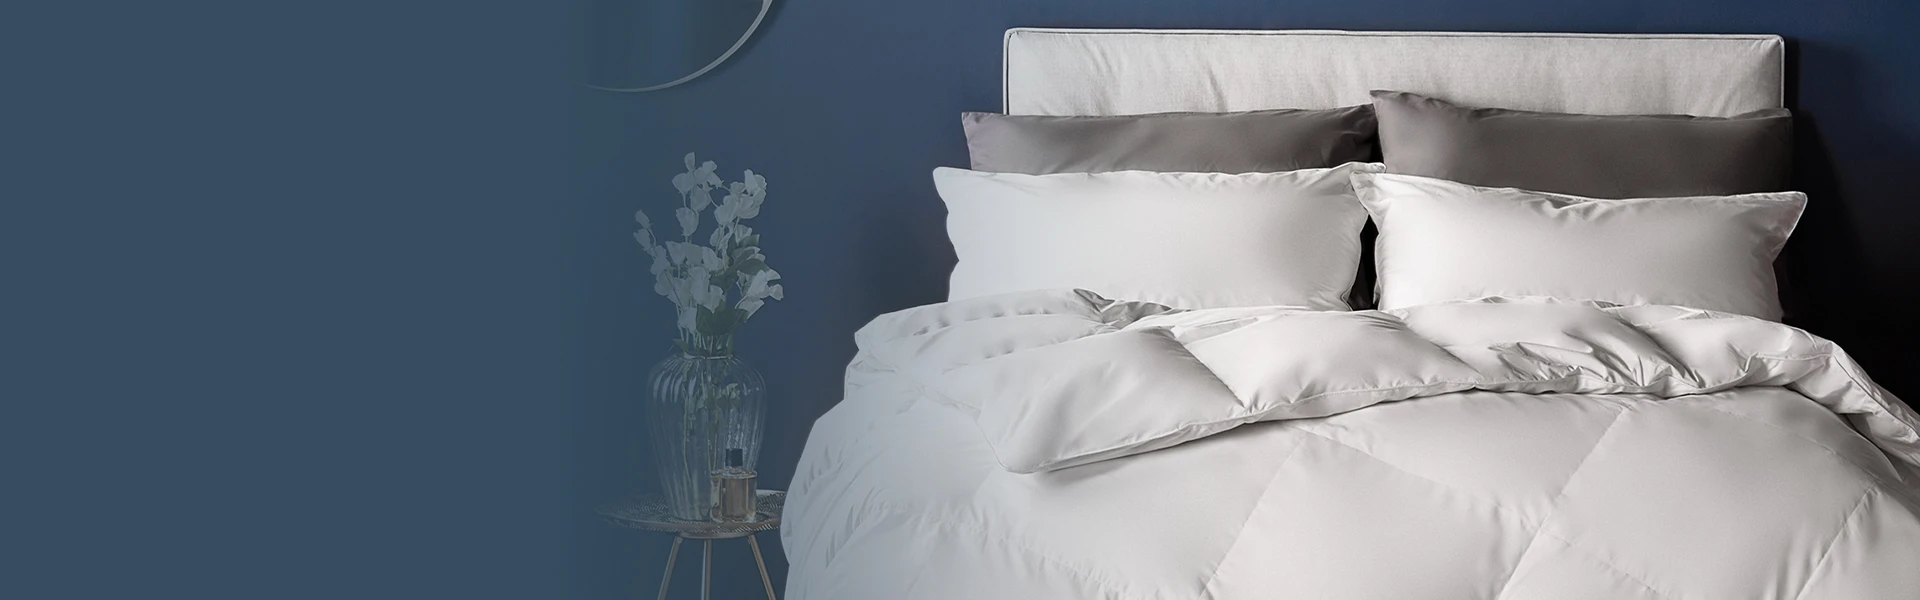 feather pillows & duvet on bed. Flowers in vase next to bed